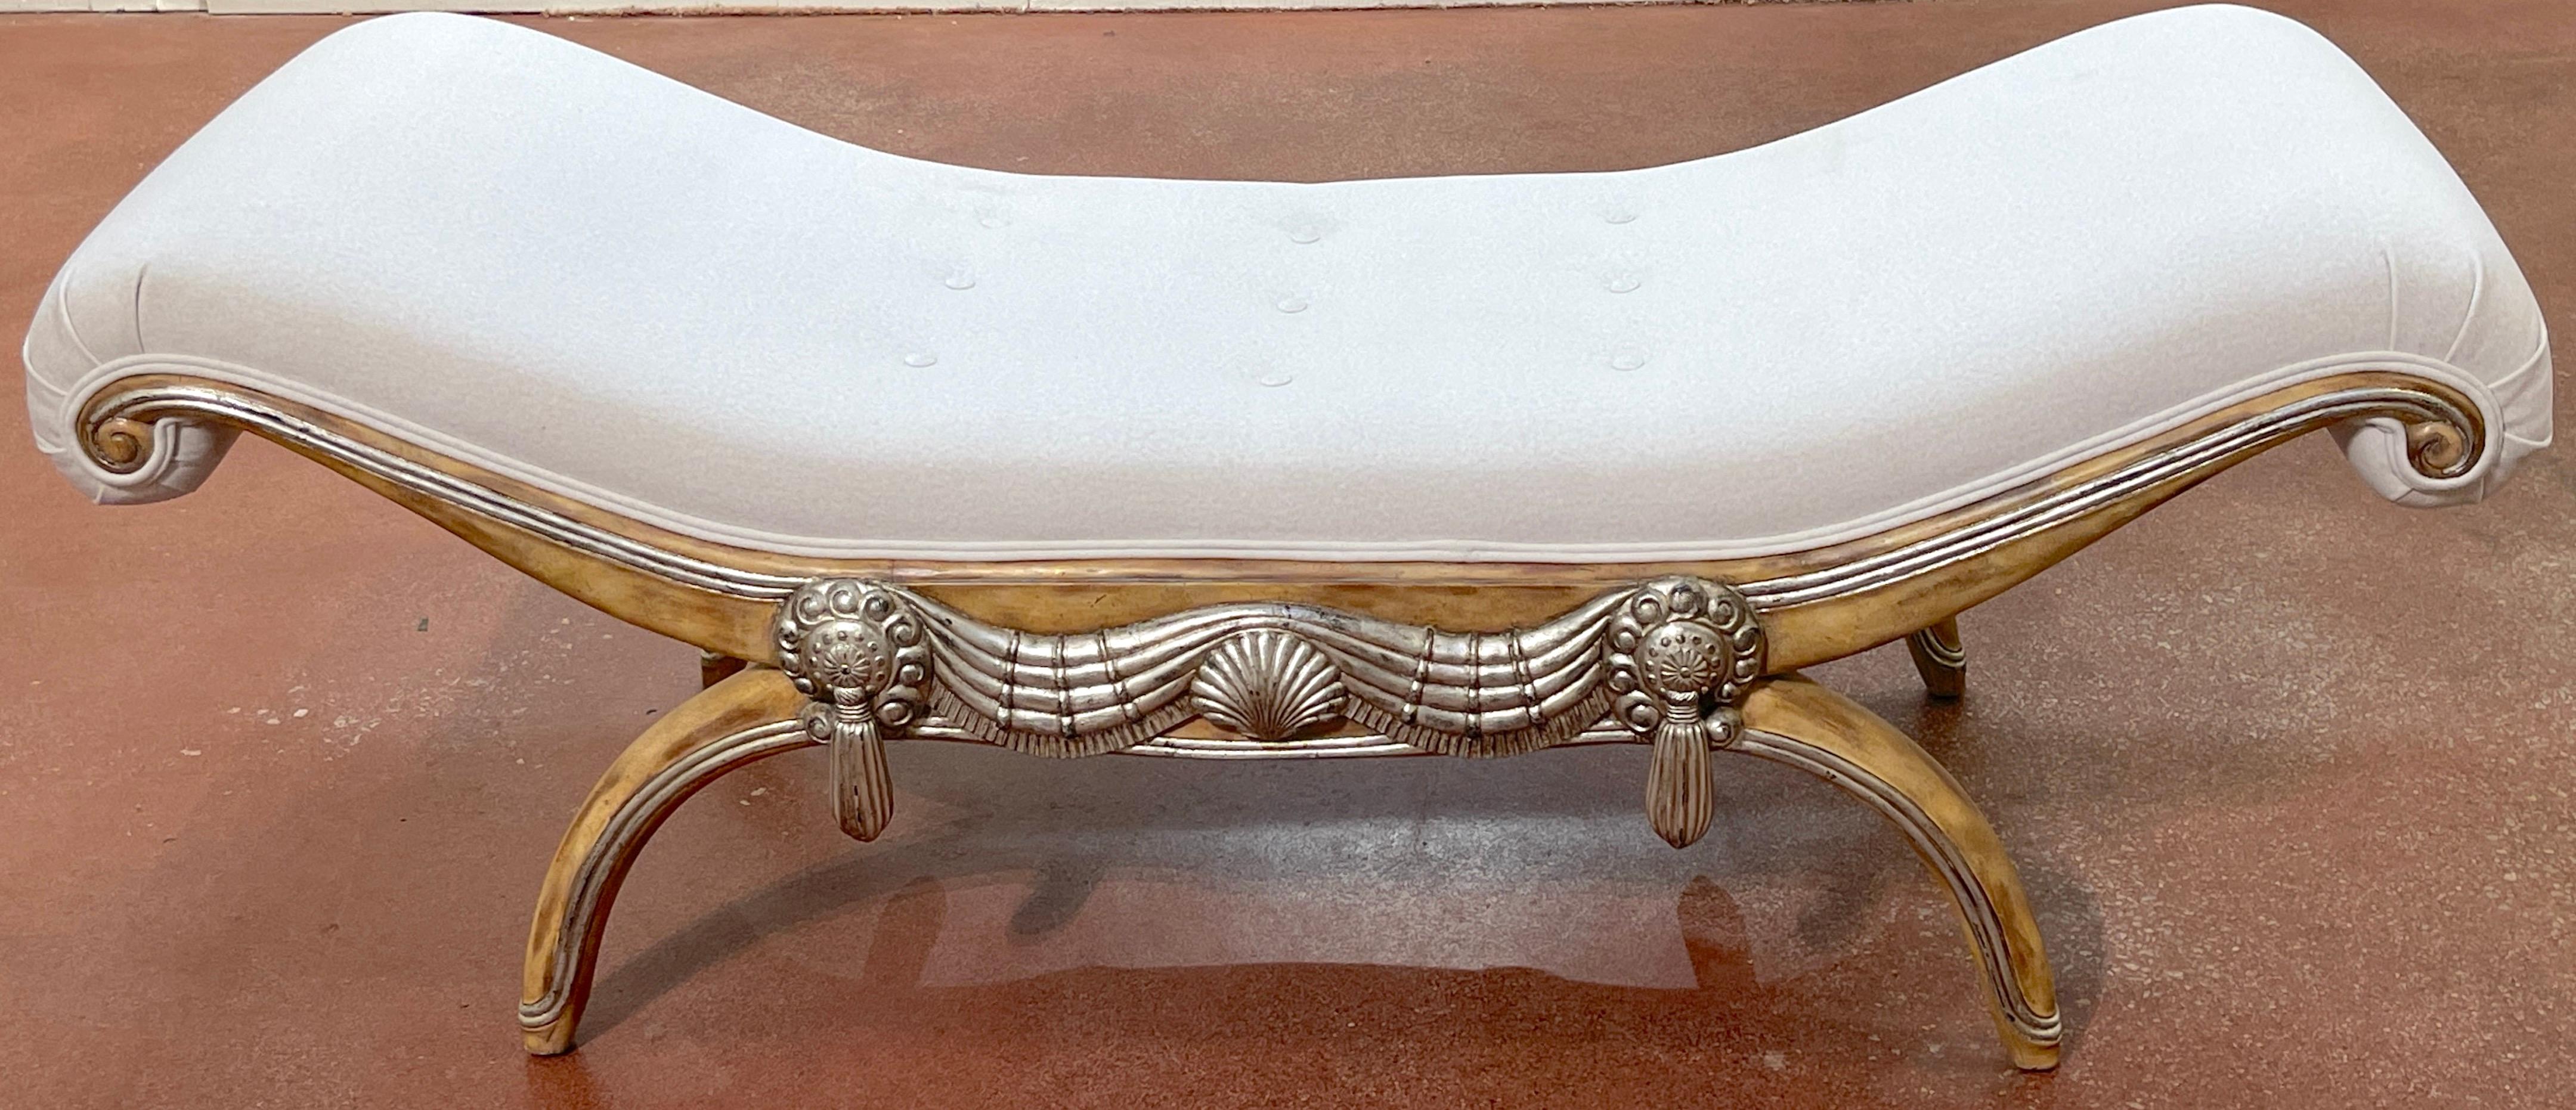 French Modern Bleached & Silverleaf Curule Bench with Cashmere Upholstery 
France, Circa 1950s 

A glamorous French modern bleached & silverleaf curule bench, embodies the epitome of sophistication and French modern design. Made in France circa